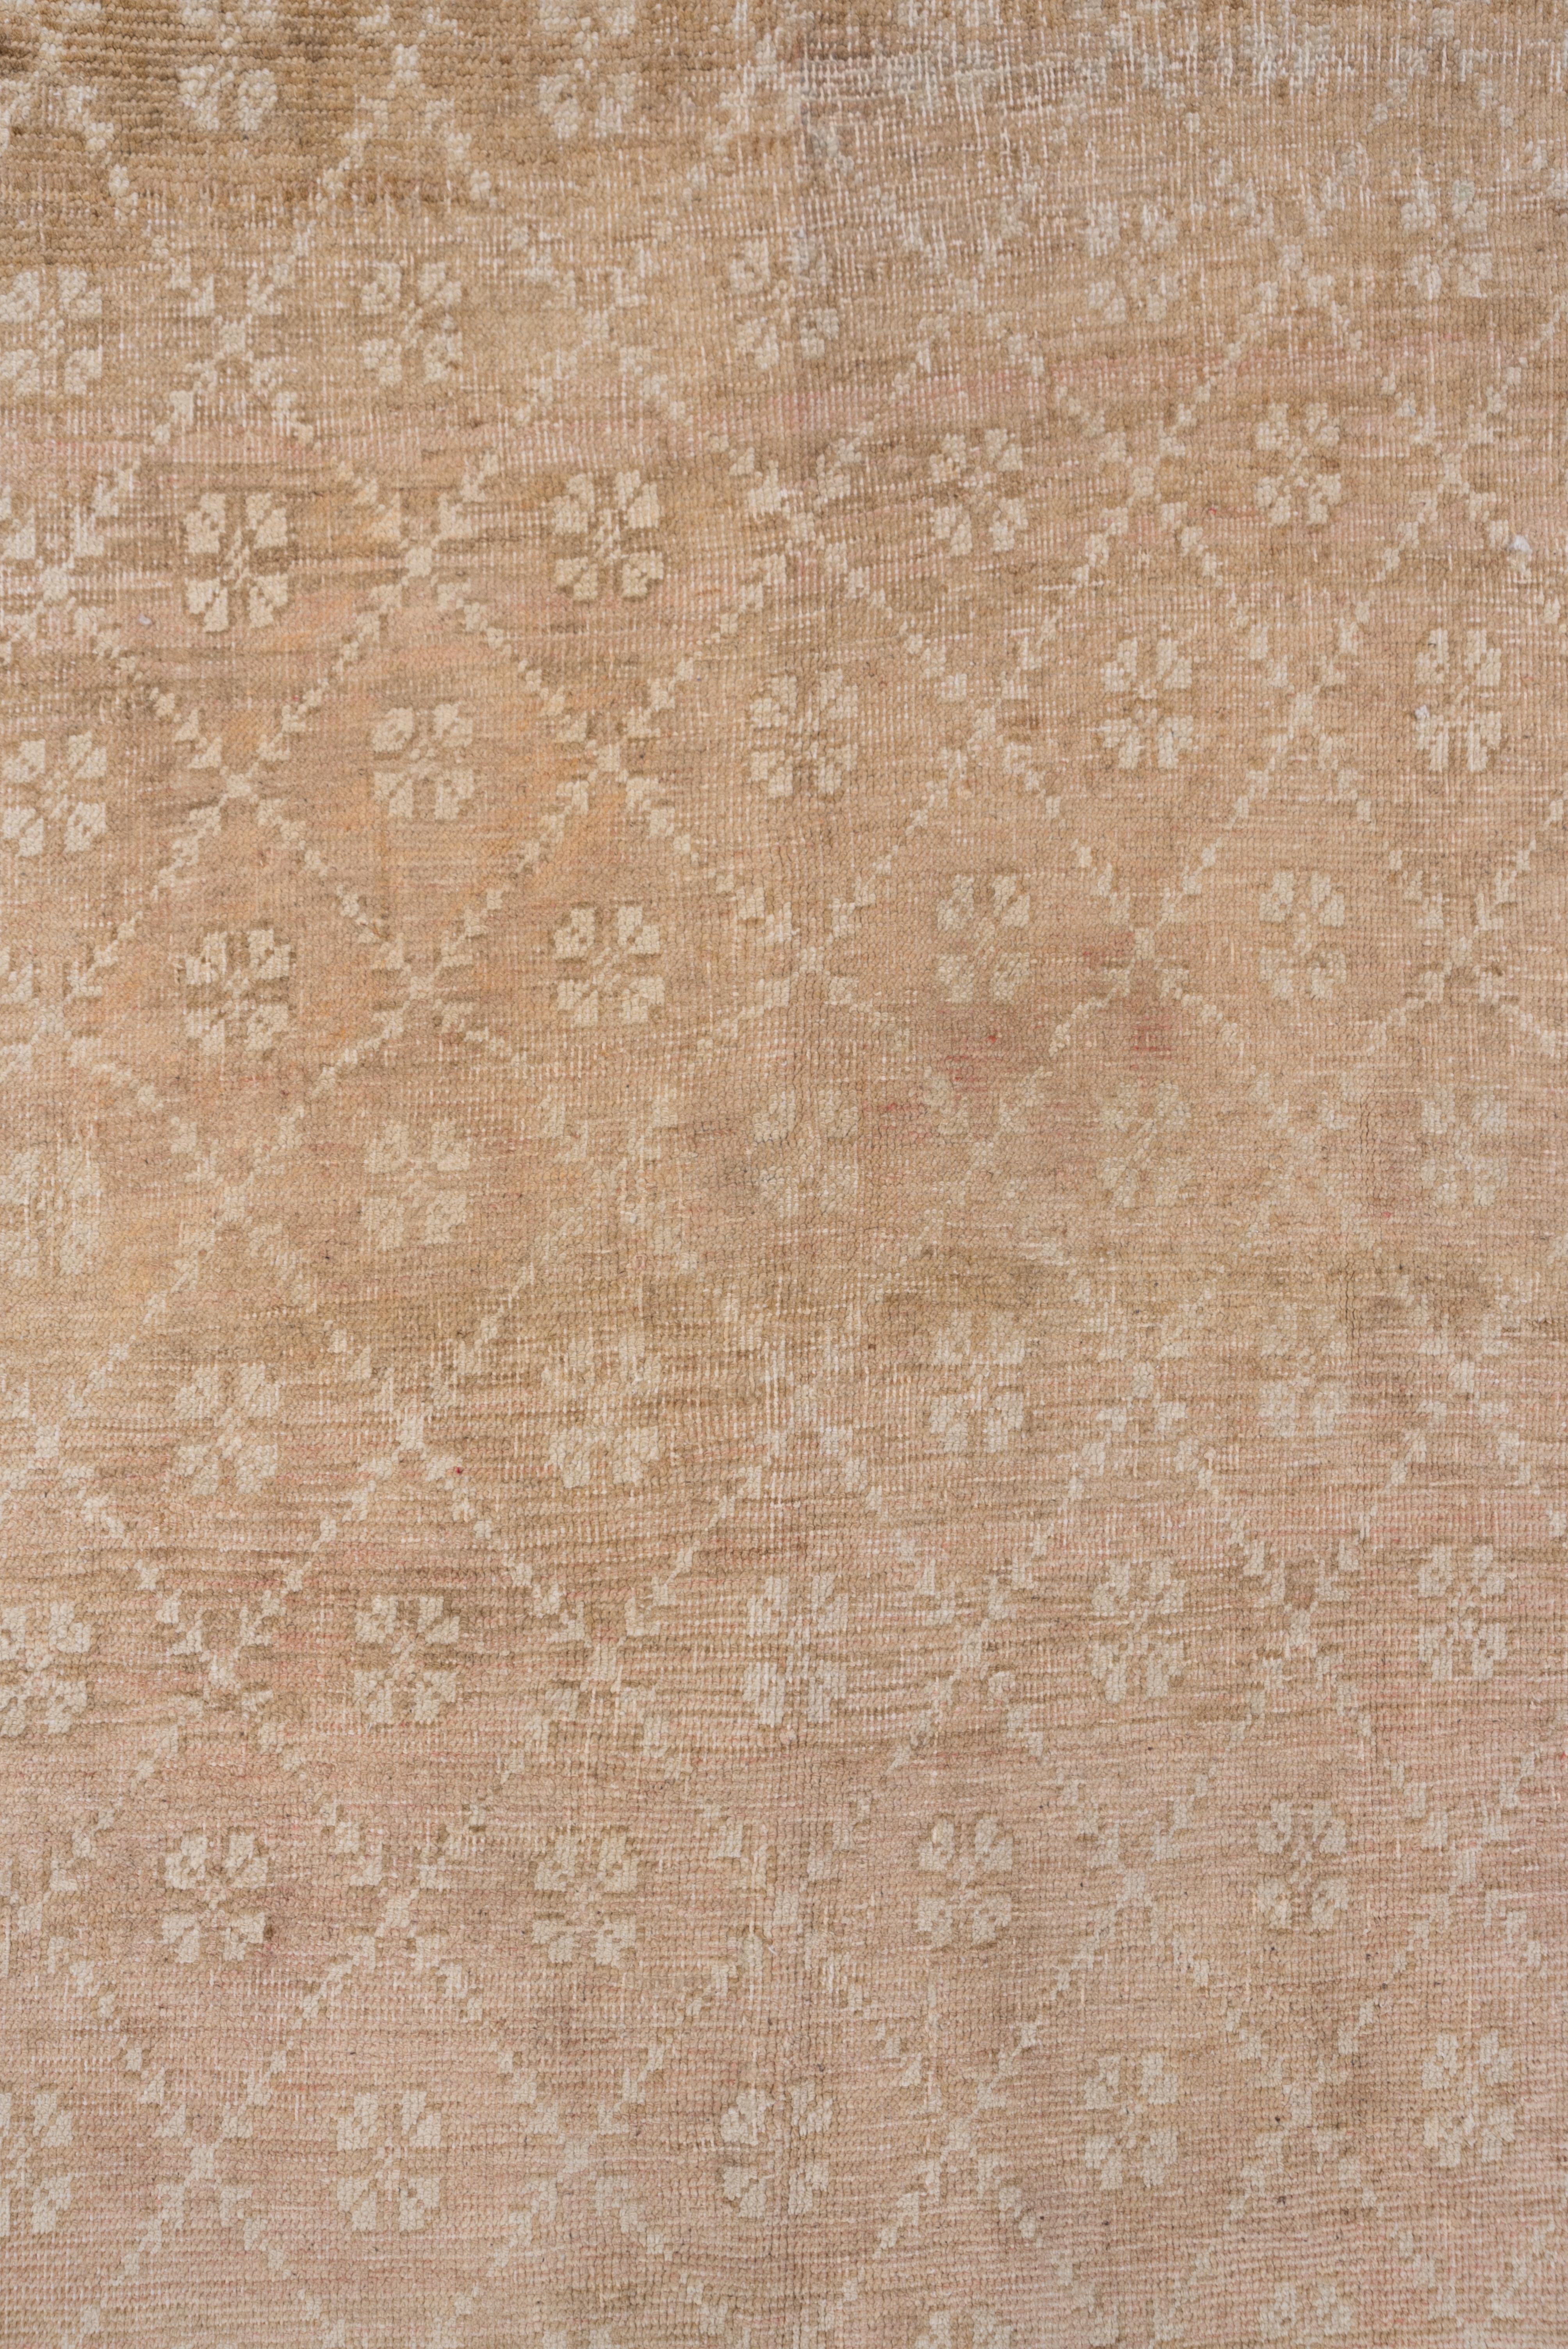 This plain border large Turkish rustic scatter shows a simple lozenge leaf lattice in sand enclosing sand rosettes on a buff-beige ground.